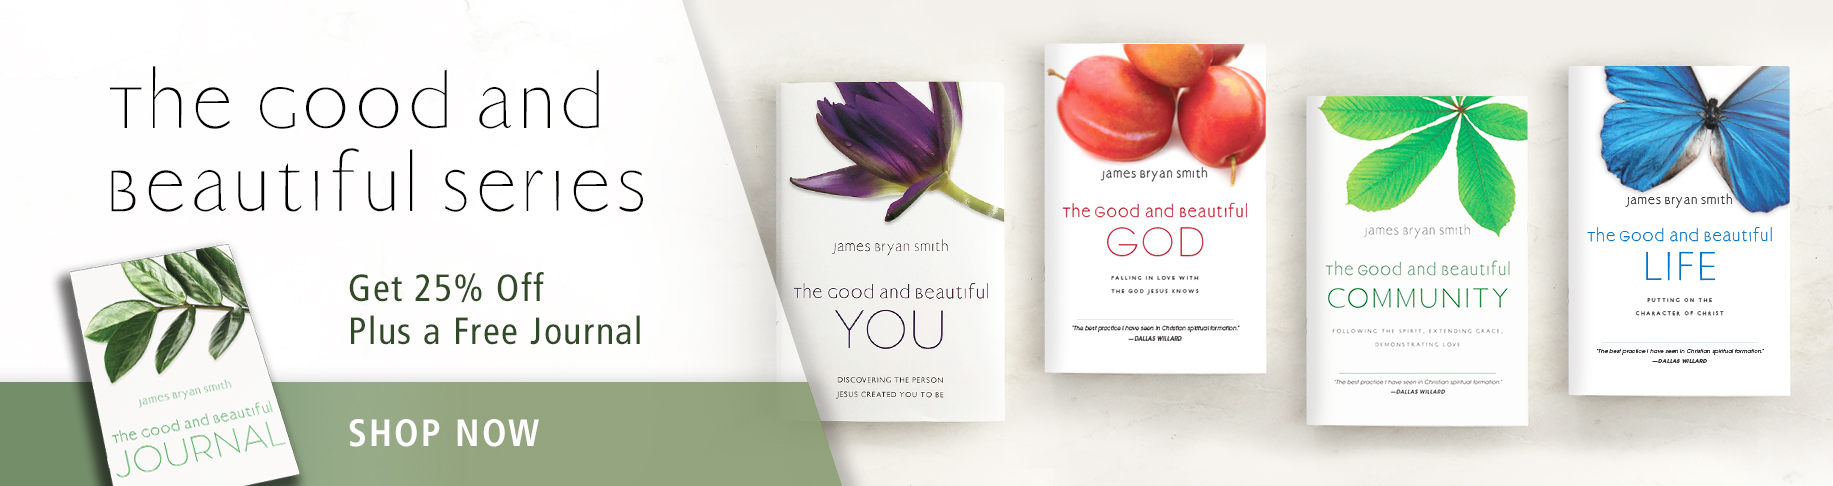 The Good and Beautiful Series - Get 25% Off plus a Free Journal